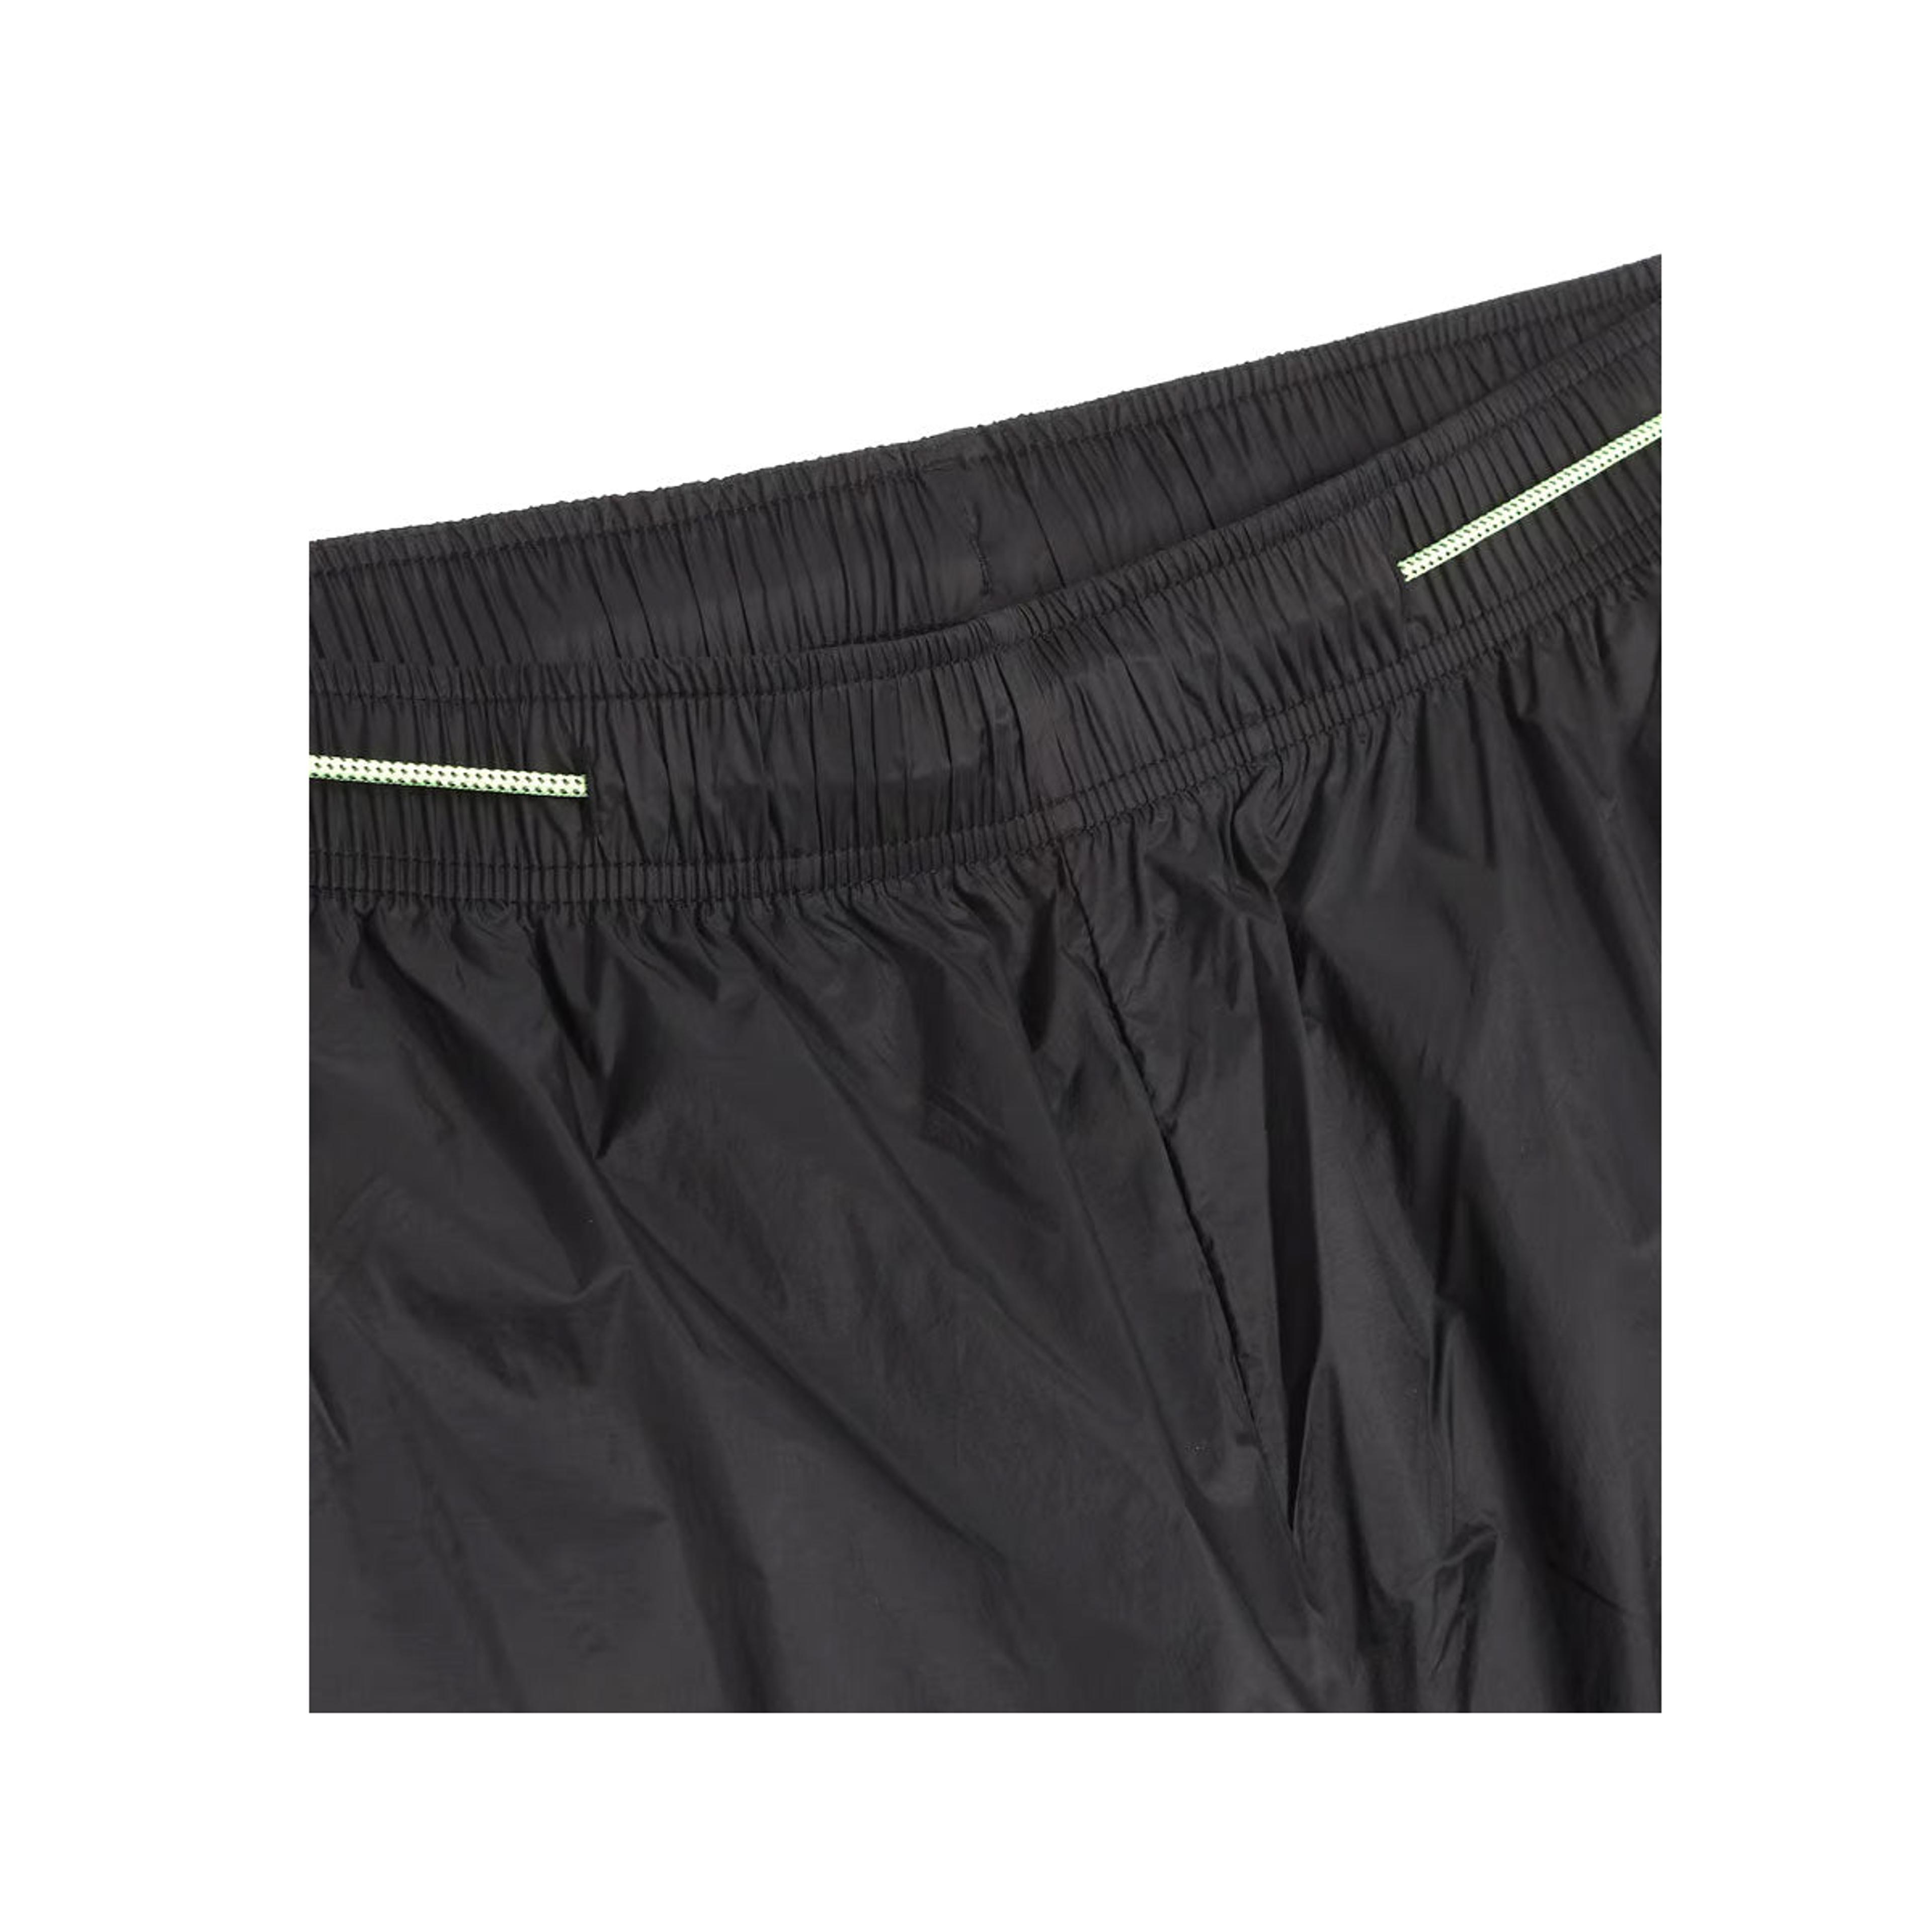 Alternate View 1 of Nike Men's ACG "Cinder Cone" Windshell Trousers